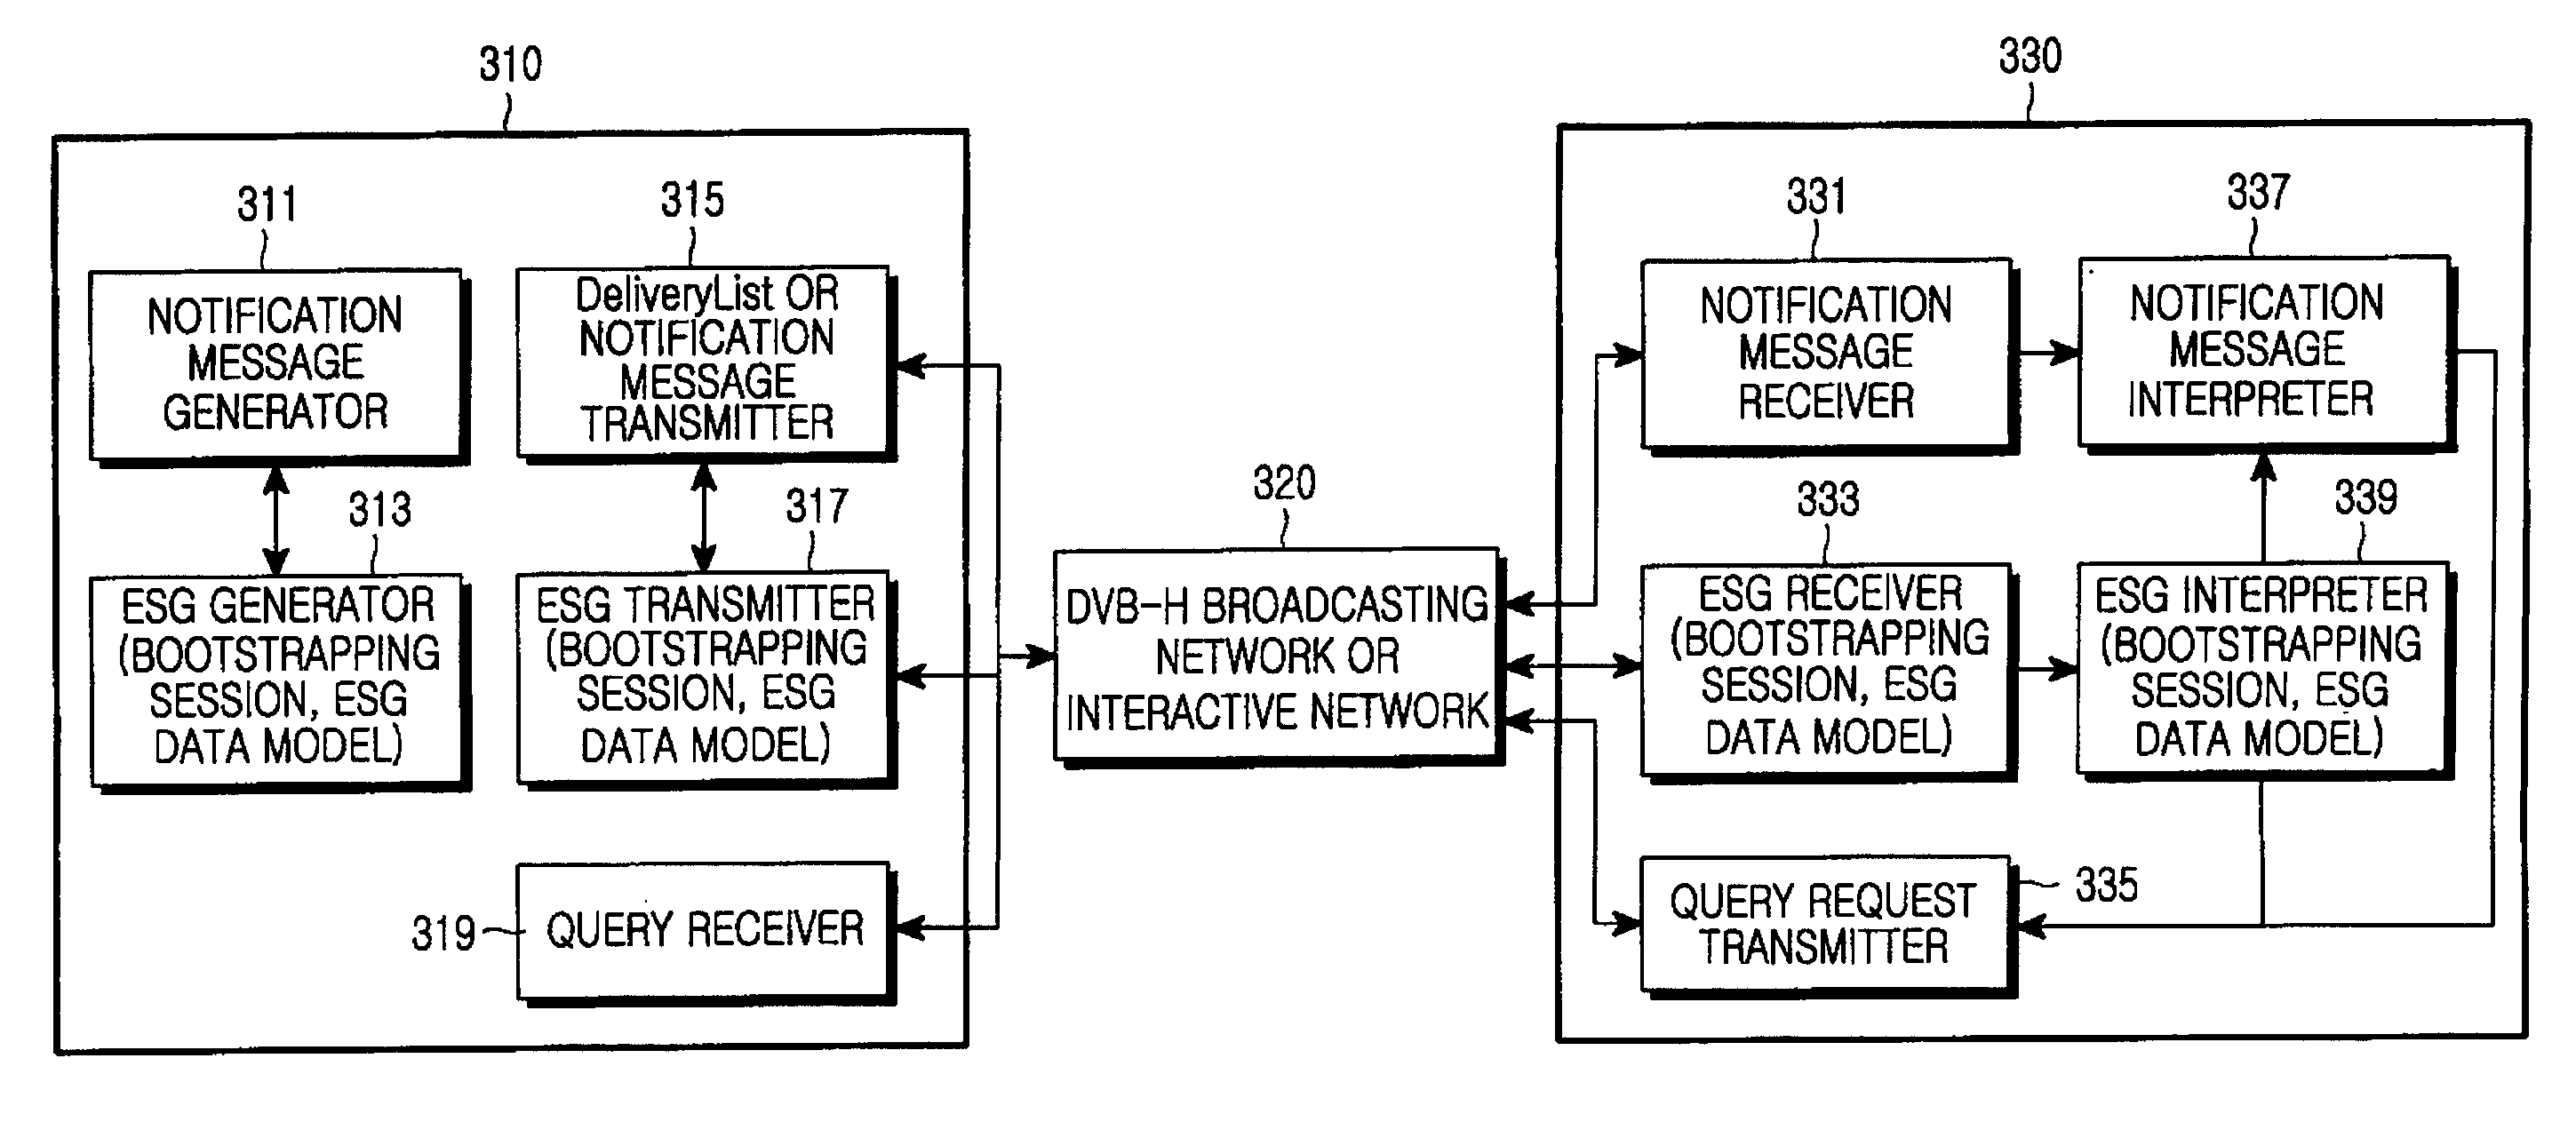 Apparatus and method for transmitting/receiving notification message in a digital video broadcasting system